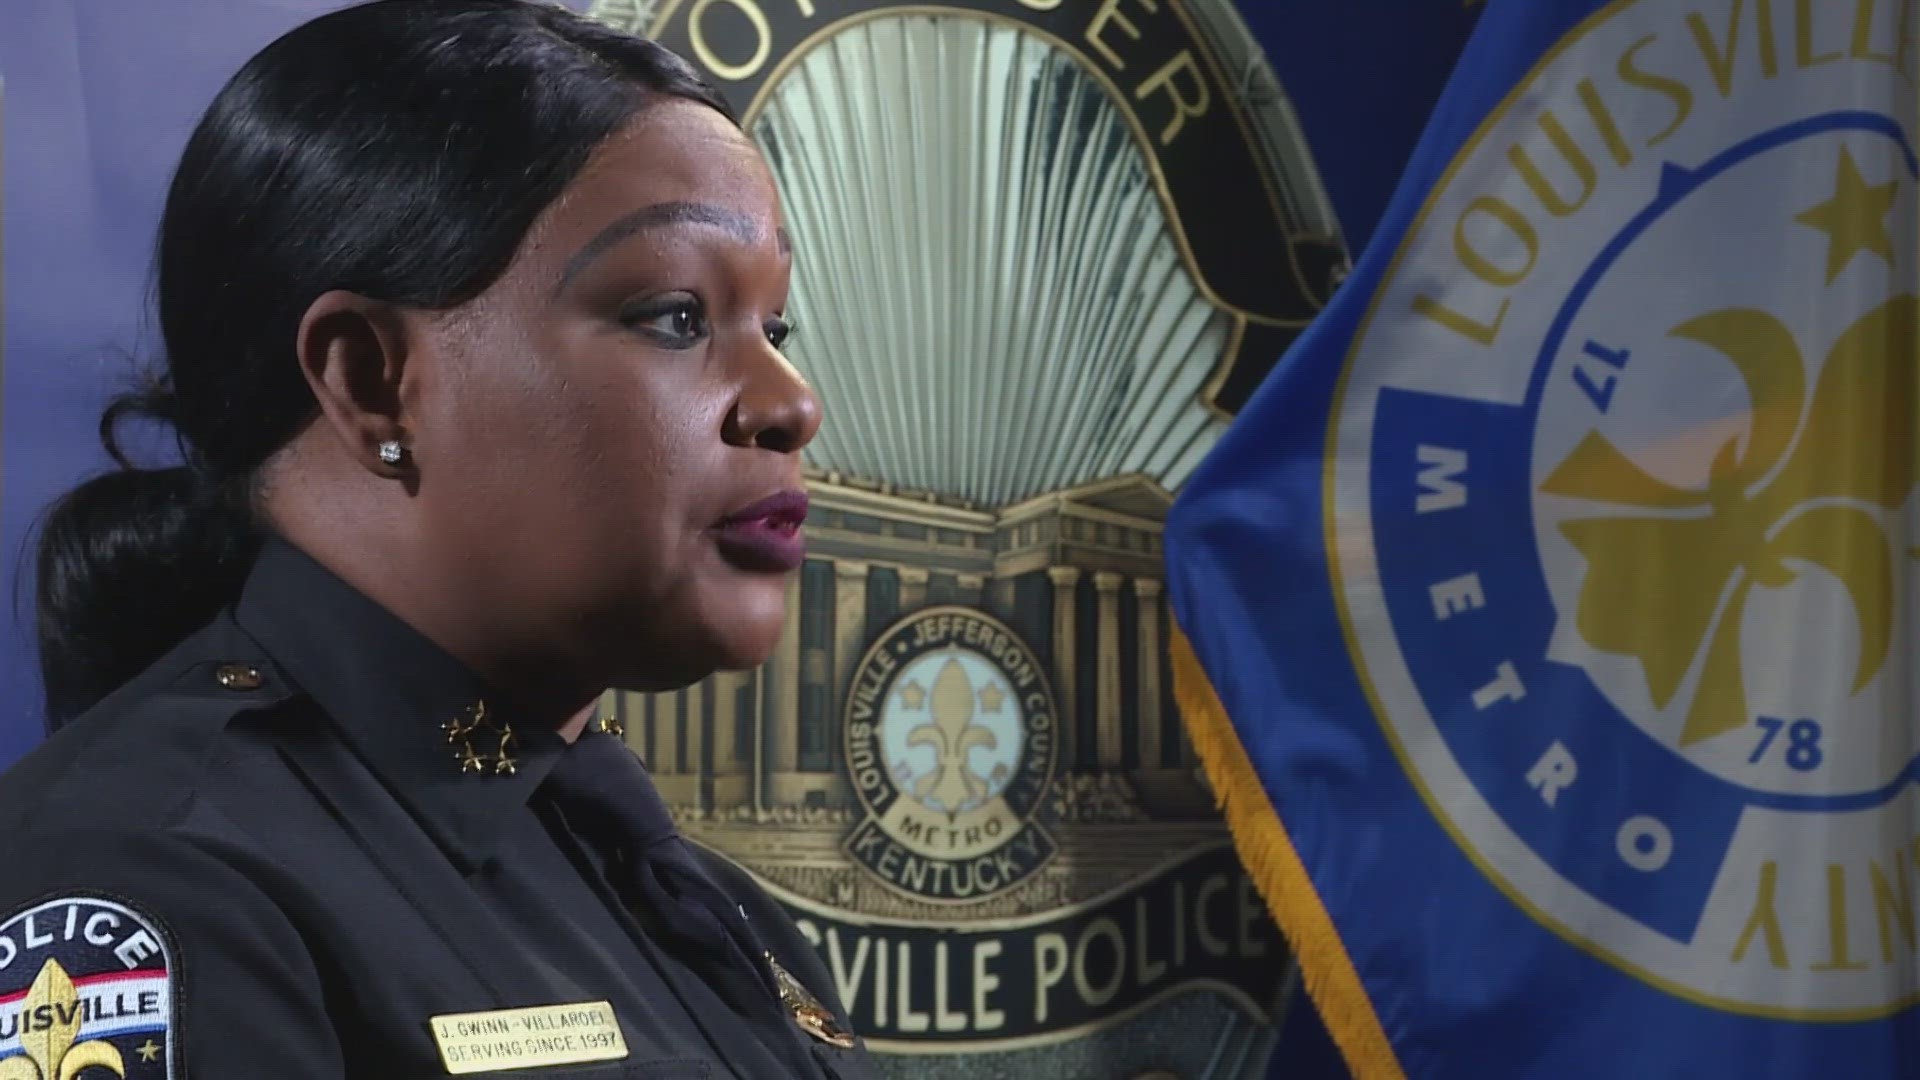 Jacquelyn Gwinn-Villaroel was just four months into her role as LMPD's interim chief, when a gunman opened fire on his colleagues and responding police.